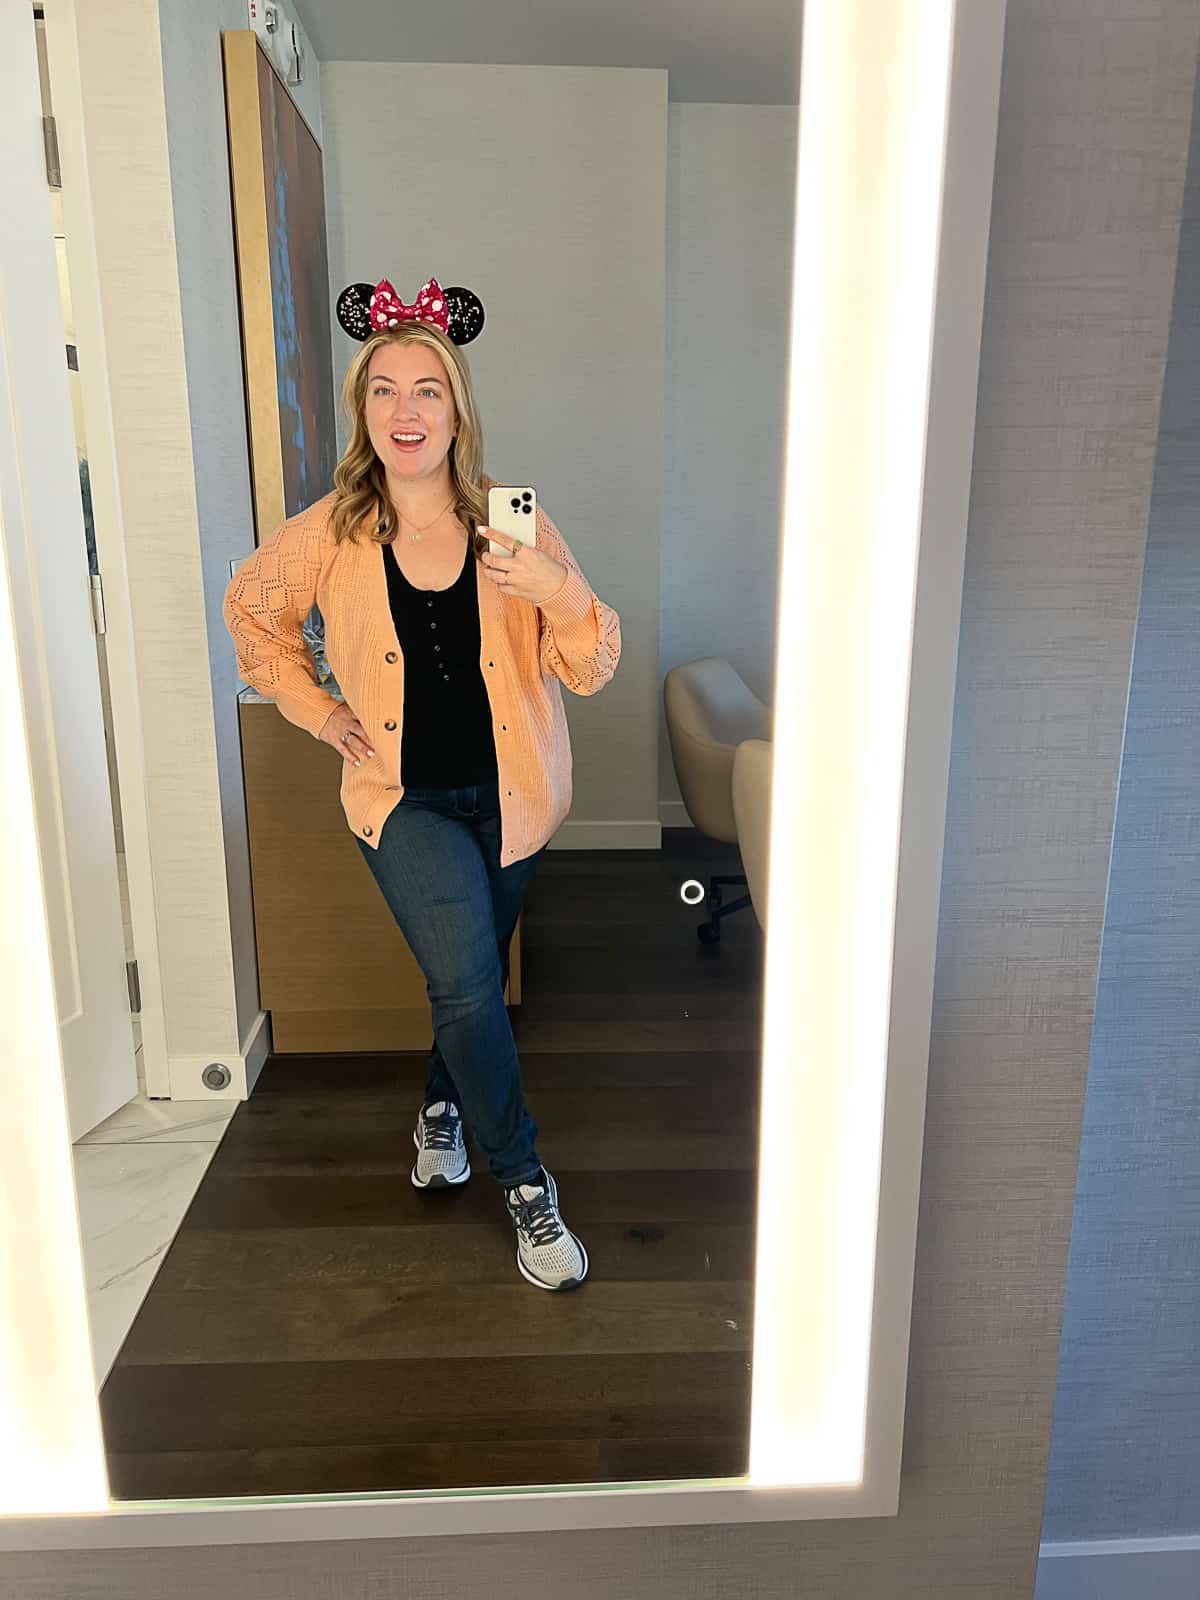 Disney Blogger Jenna Passaro wearing Disney outfit for women with Oversized sweater in Disneyland in December